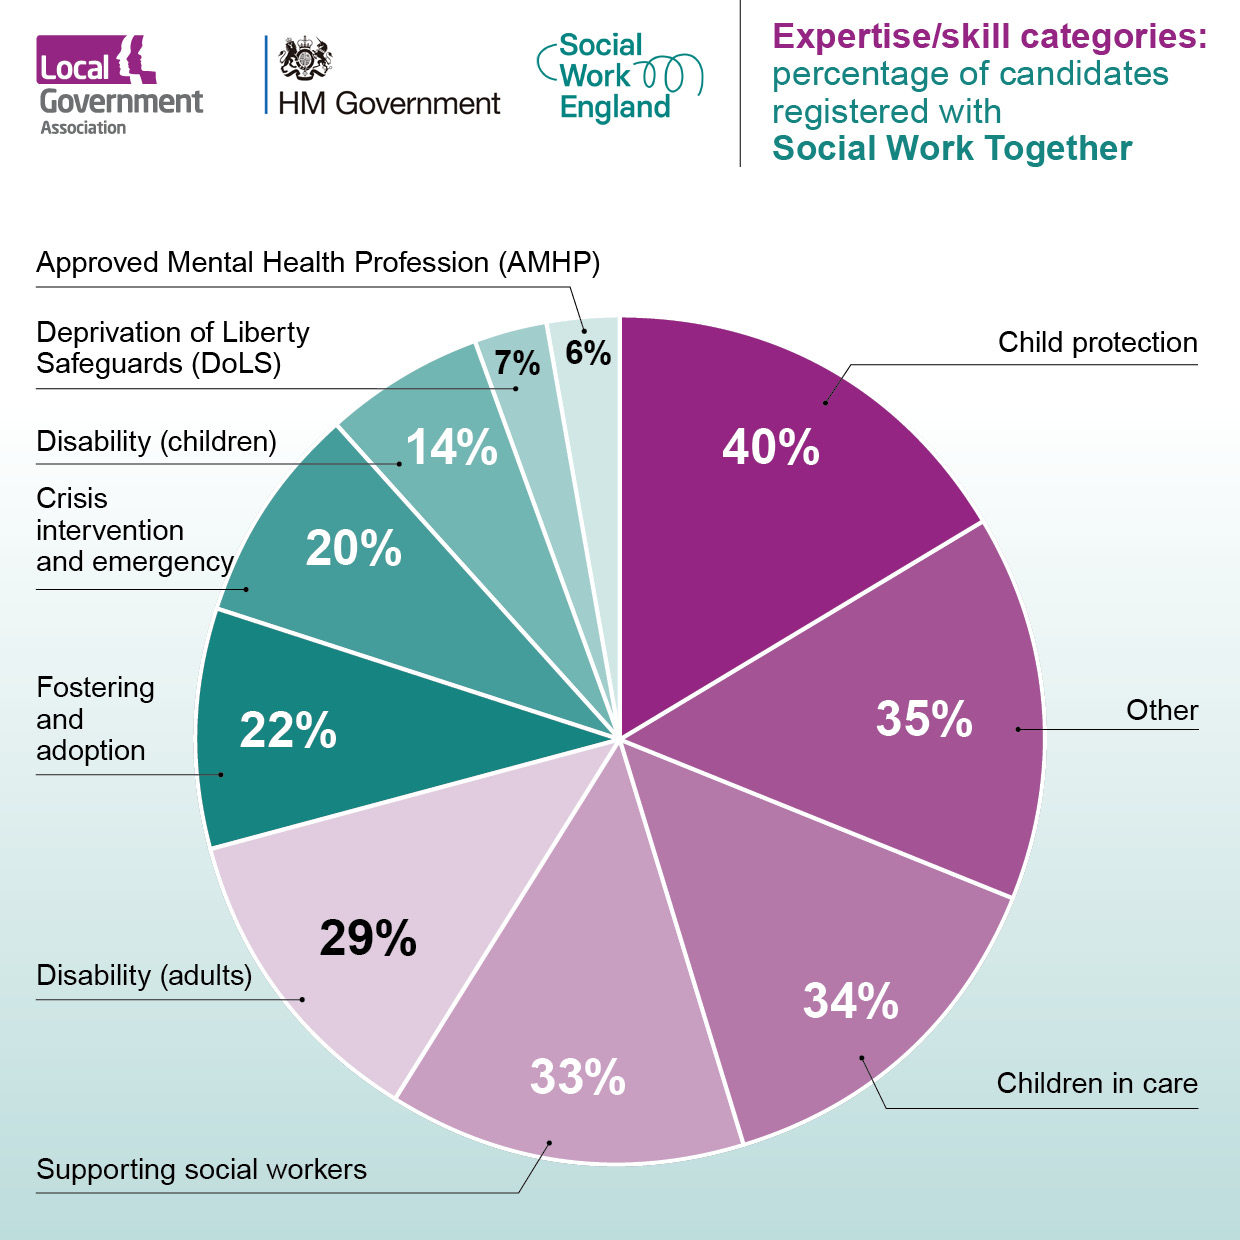 Social Work Together: expertise/skills distribution across candidates registered with SWT